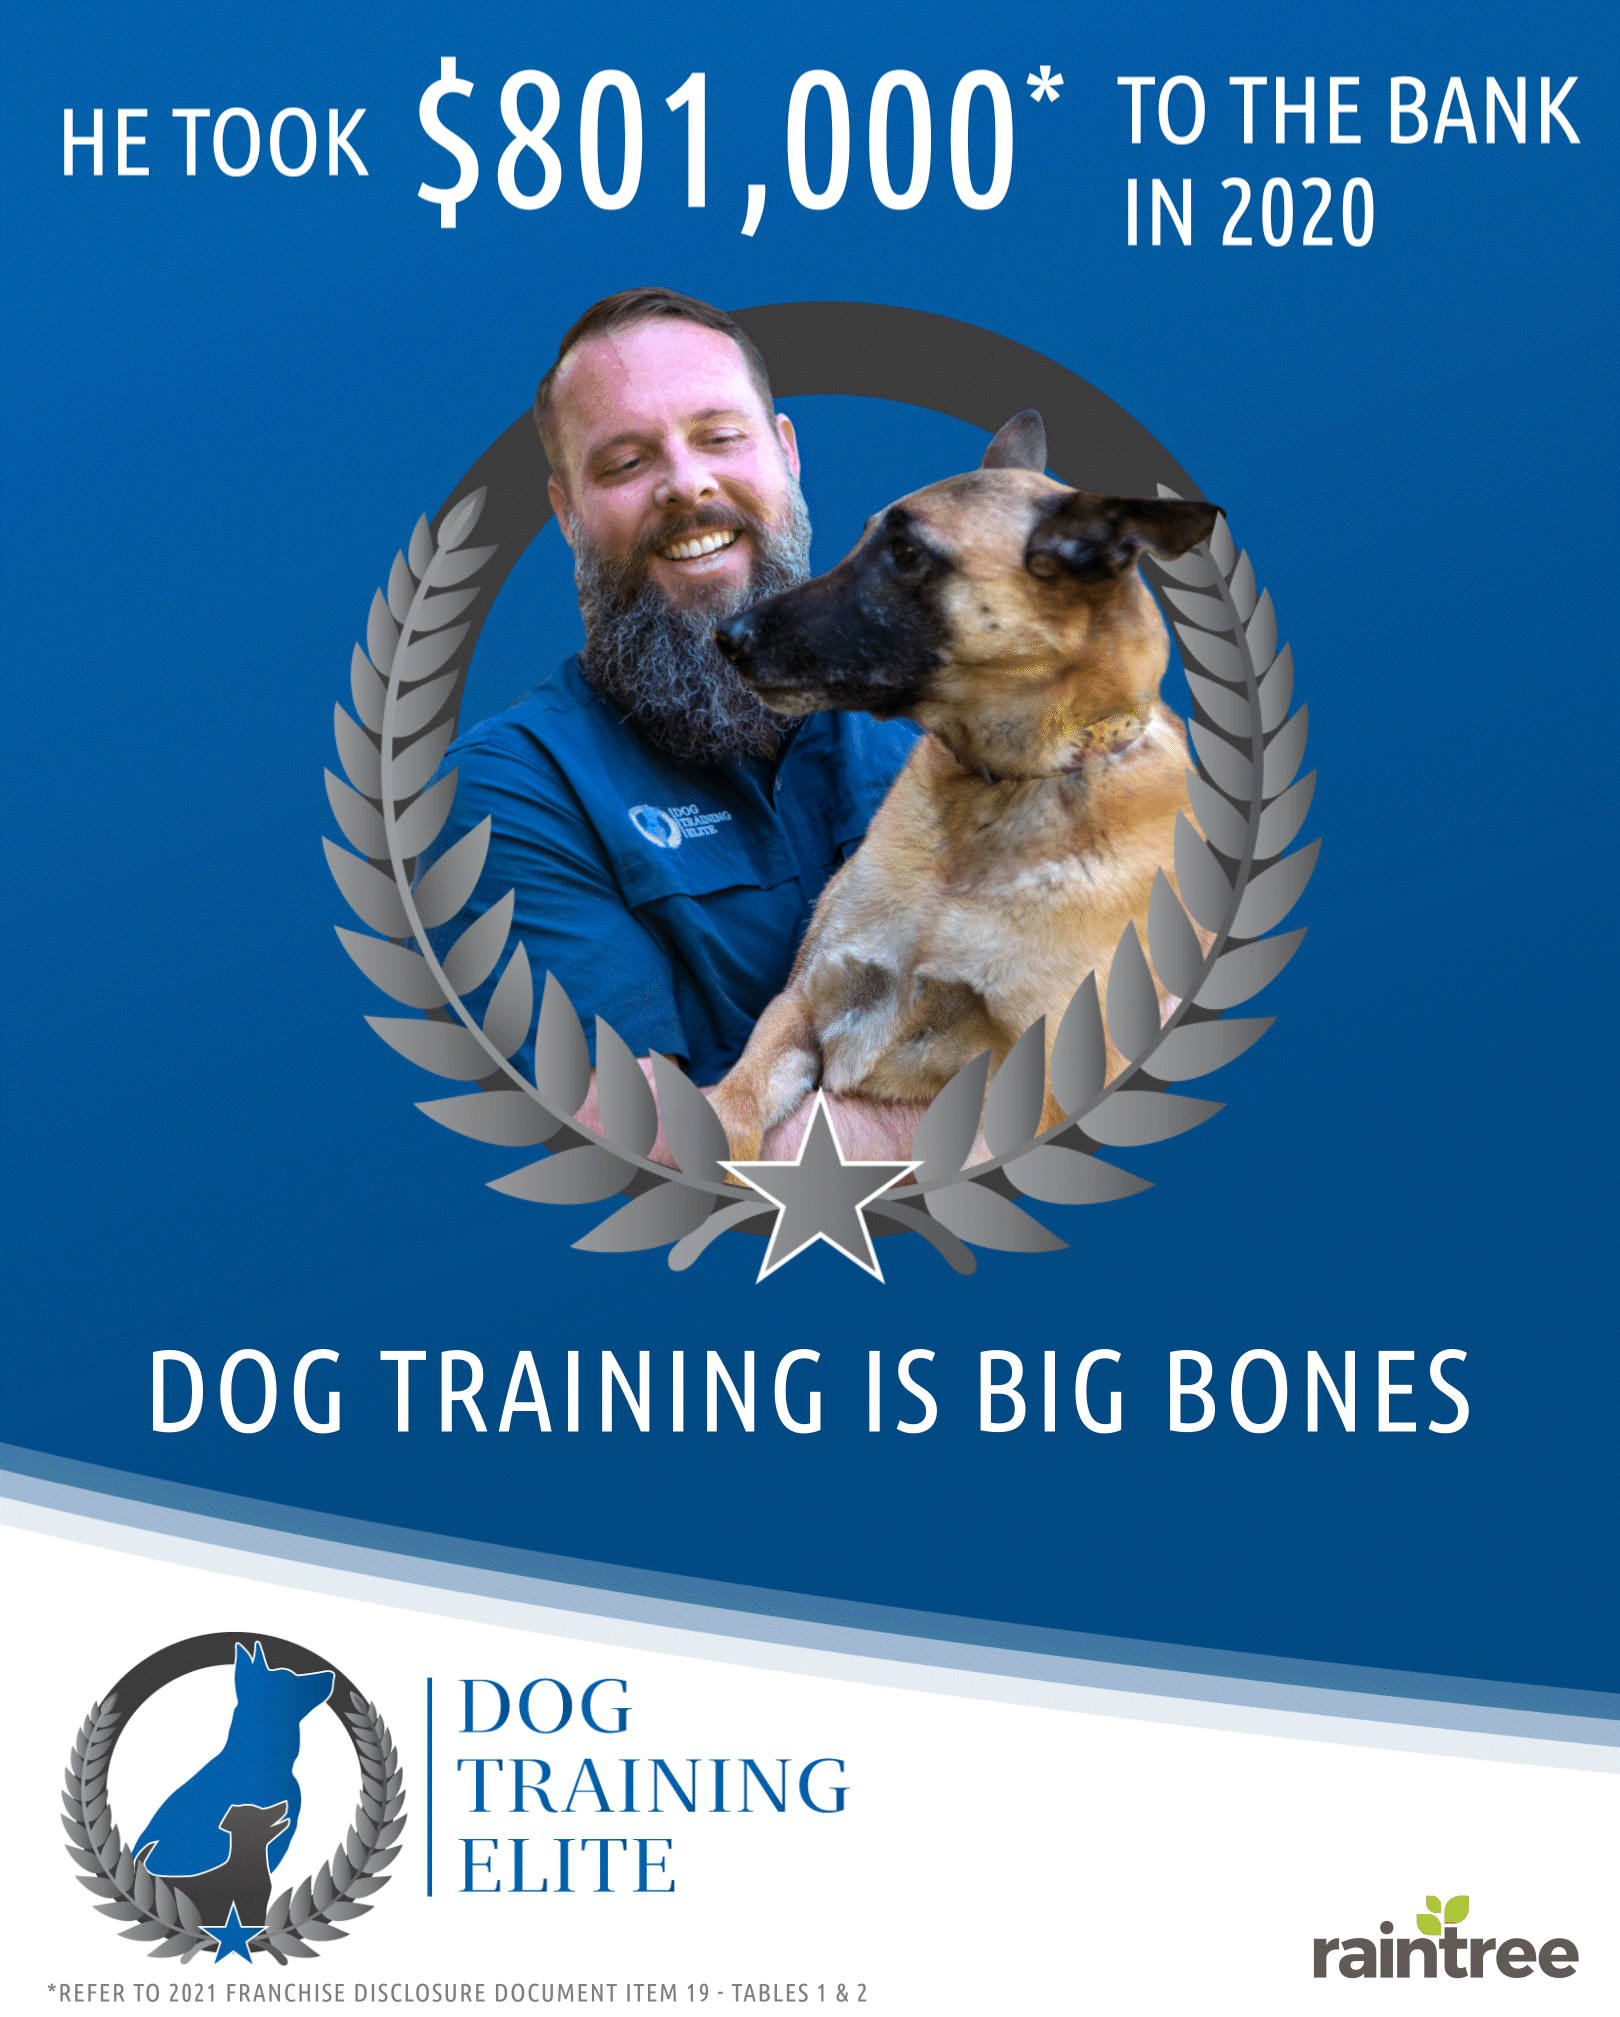 animated gif of a cutout with a guy holding his dog, framed in laurel with a star flashing up. Tet above reads HE TOOK $801,000 TO THE BANK IN 2020 and below it says DOG TRAINING IS BIG BONES. Below the image features the Dog Training Elite logo and the Raintree Growth logo